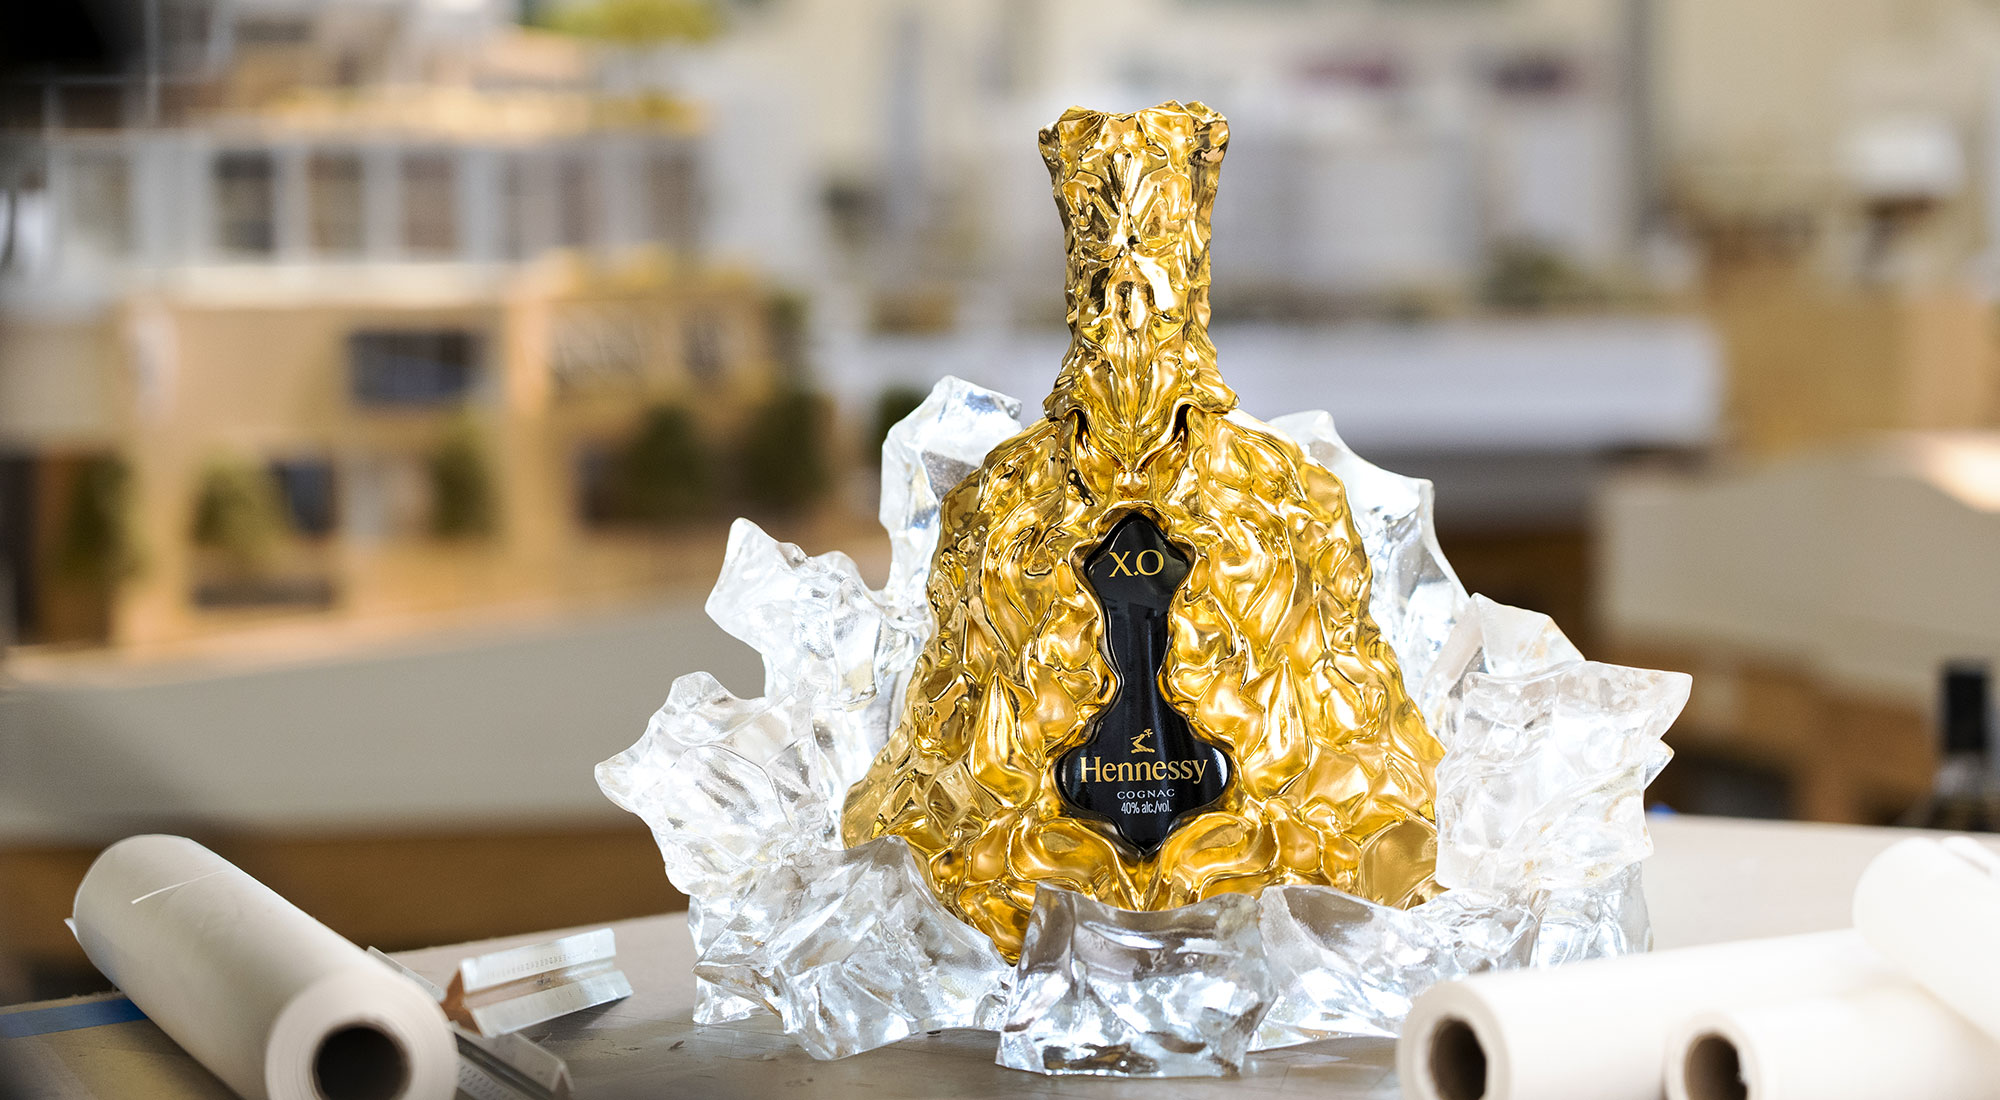 Architect Frank Gehry collaborates with Louis Vuitton on perfume bottle